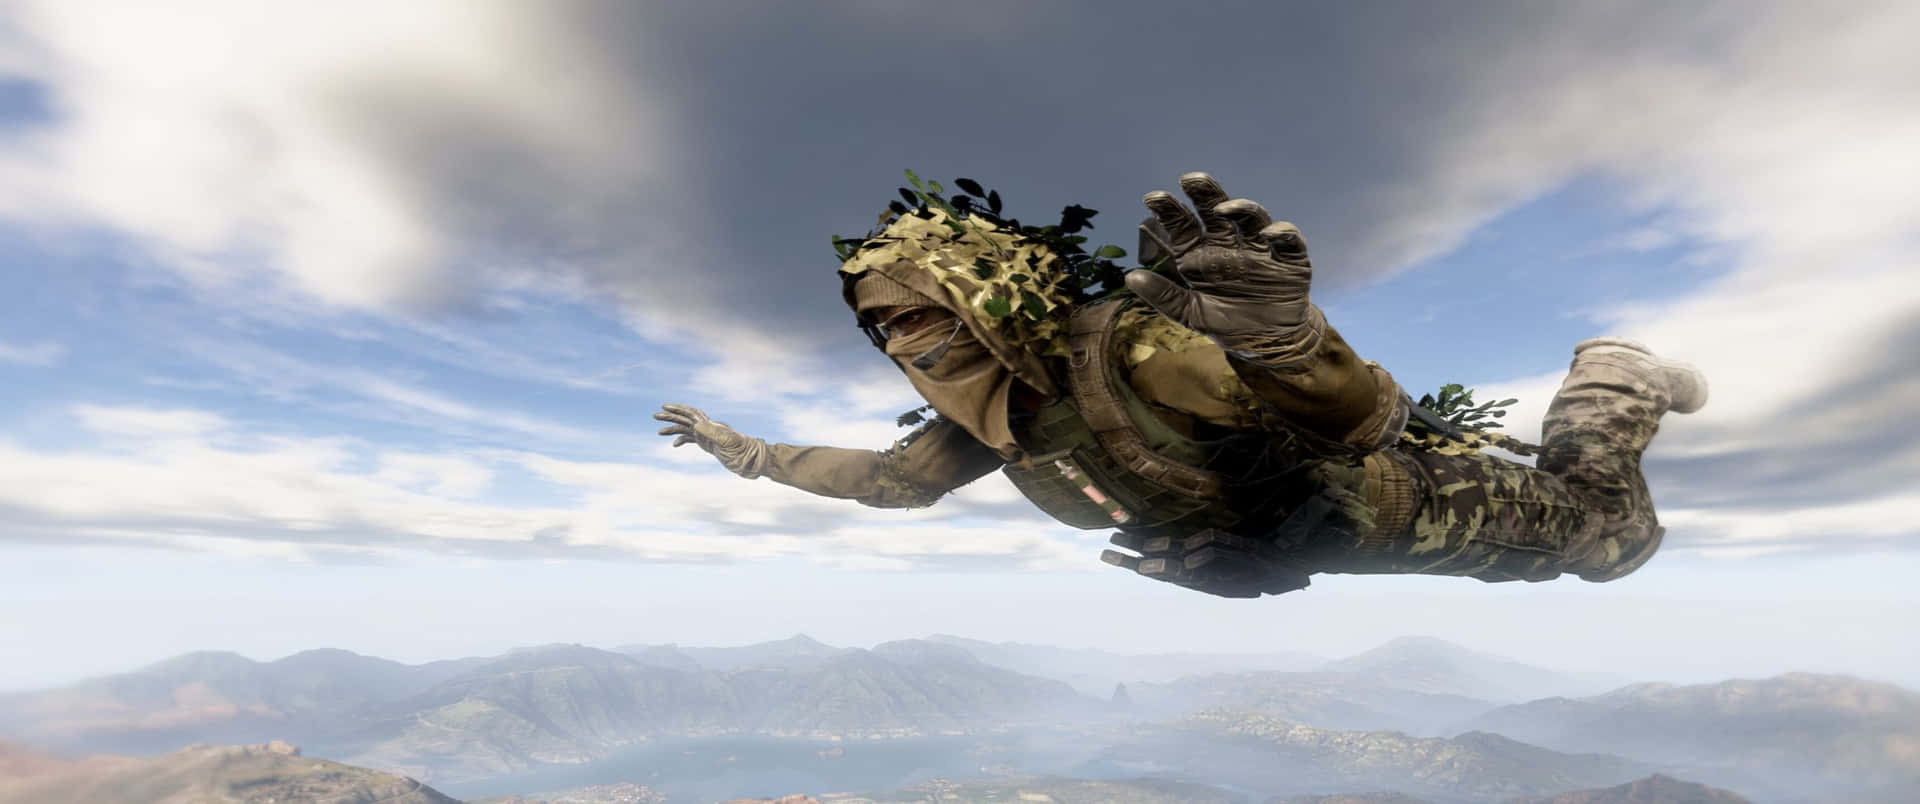 A Man Is Flying In The Air Over Mountains